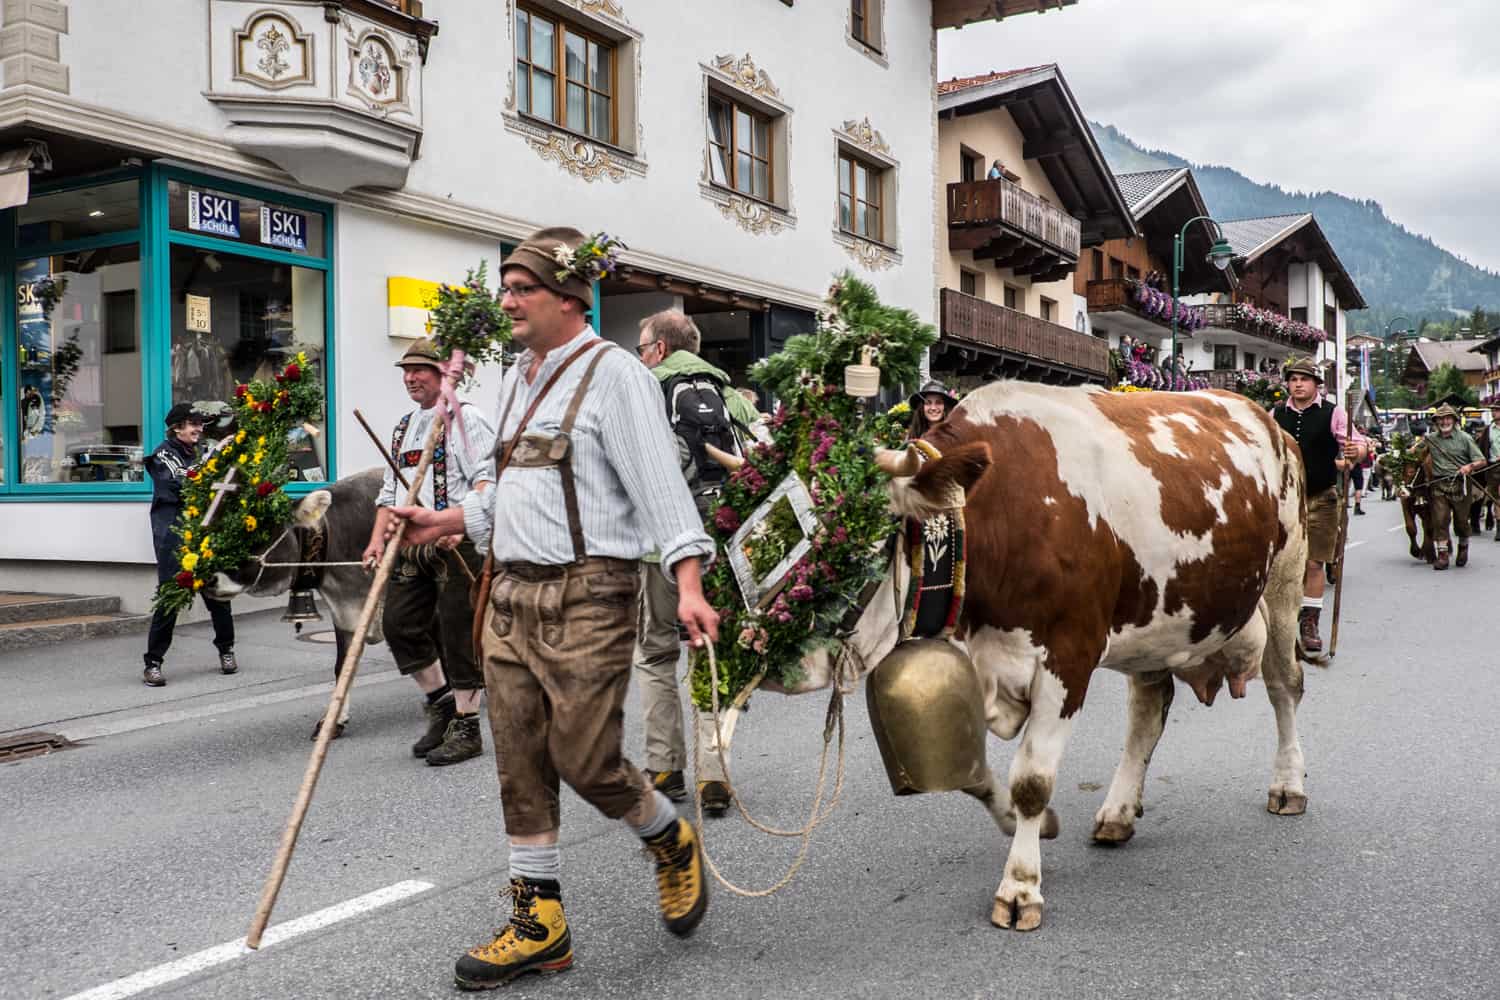 Farmers and cows at Almabtrieb in Lermoos village in Zugspitz Arena, Tirol, Austria